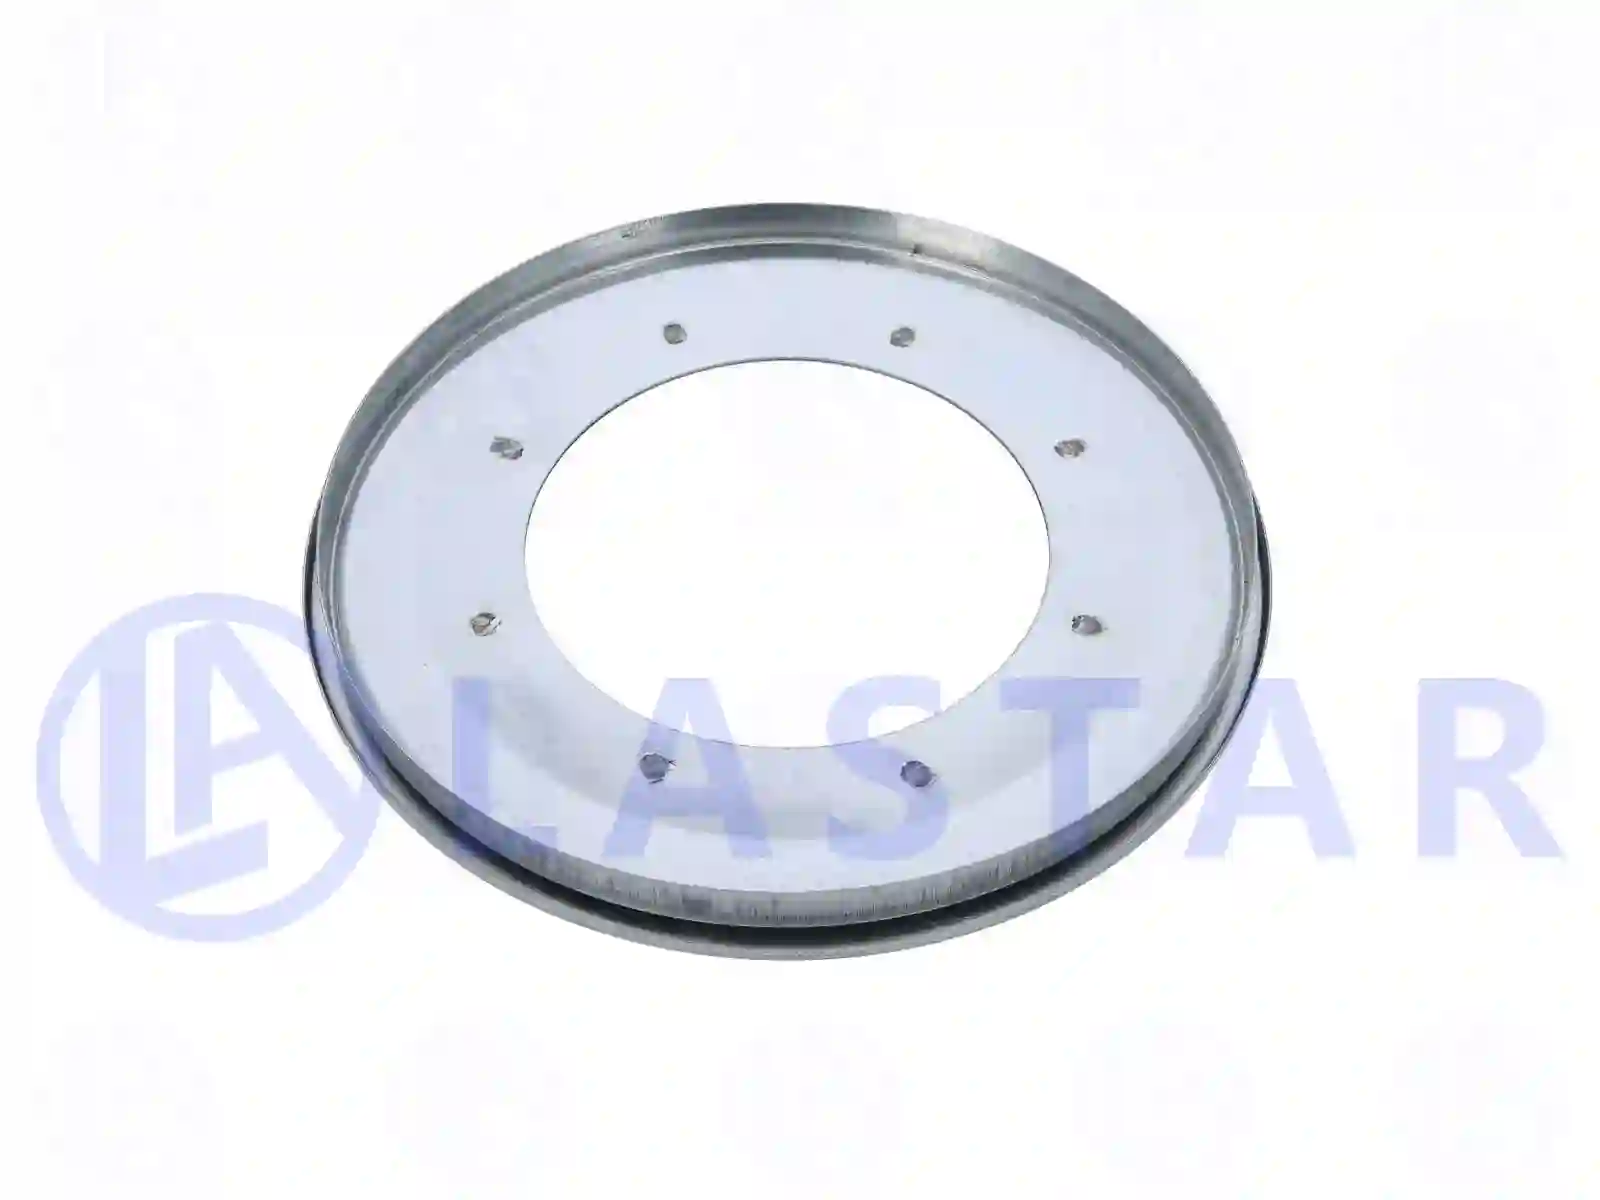 Seal ring, 77731481, 141296, , , ||  77731481 Lastar Spare Part | Truck Spare Parts, Auotomotive Spare Parts Seal ring, 77731481, 141296, , , ||  77731481 Lastar Spare Part | Truck Spare Parts, Auotomotive Spare Parts